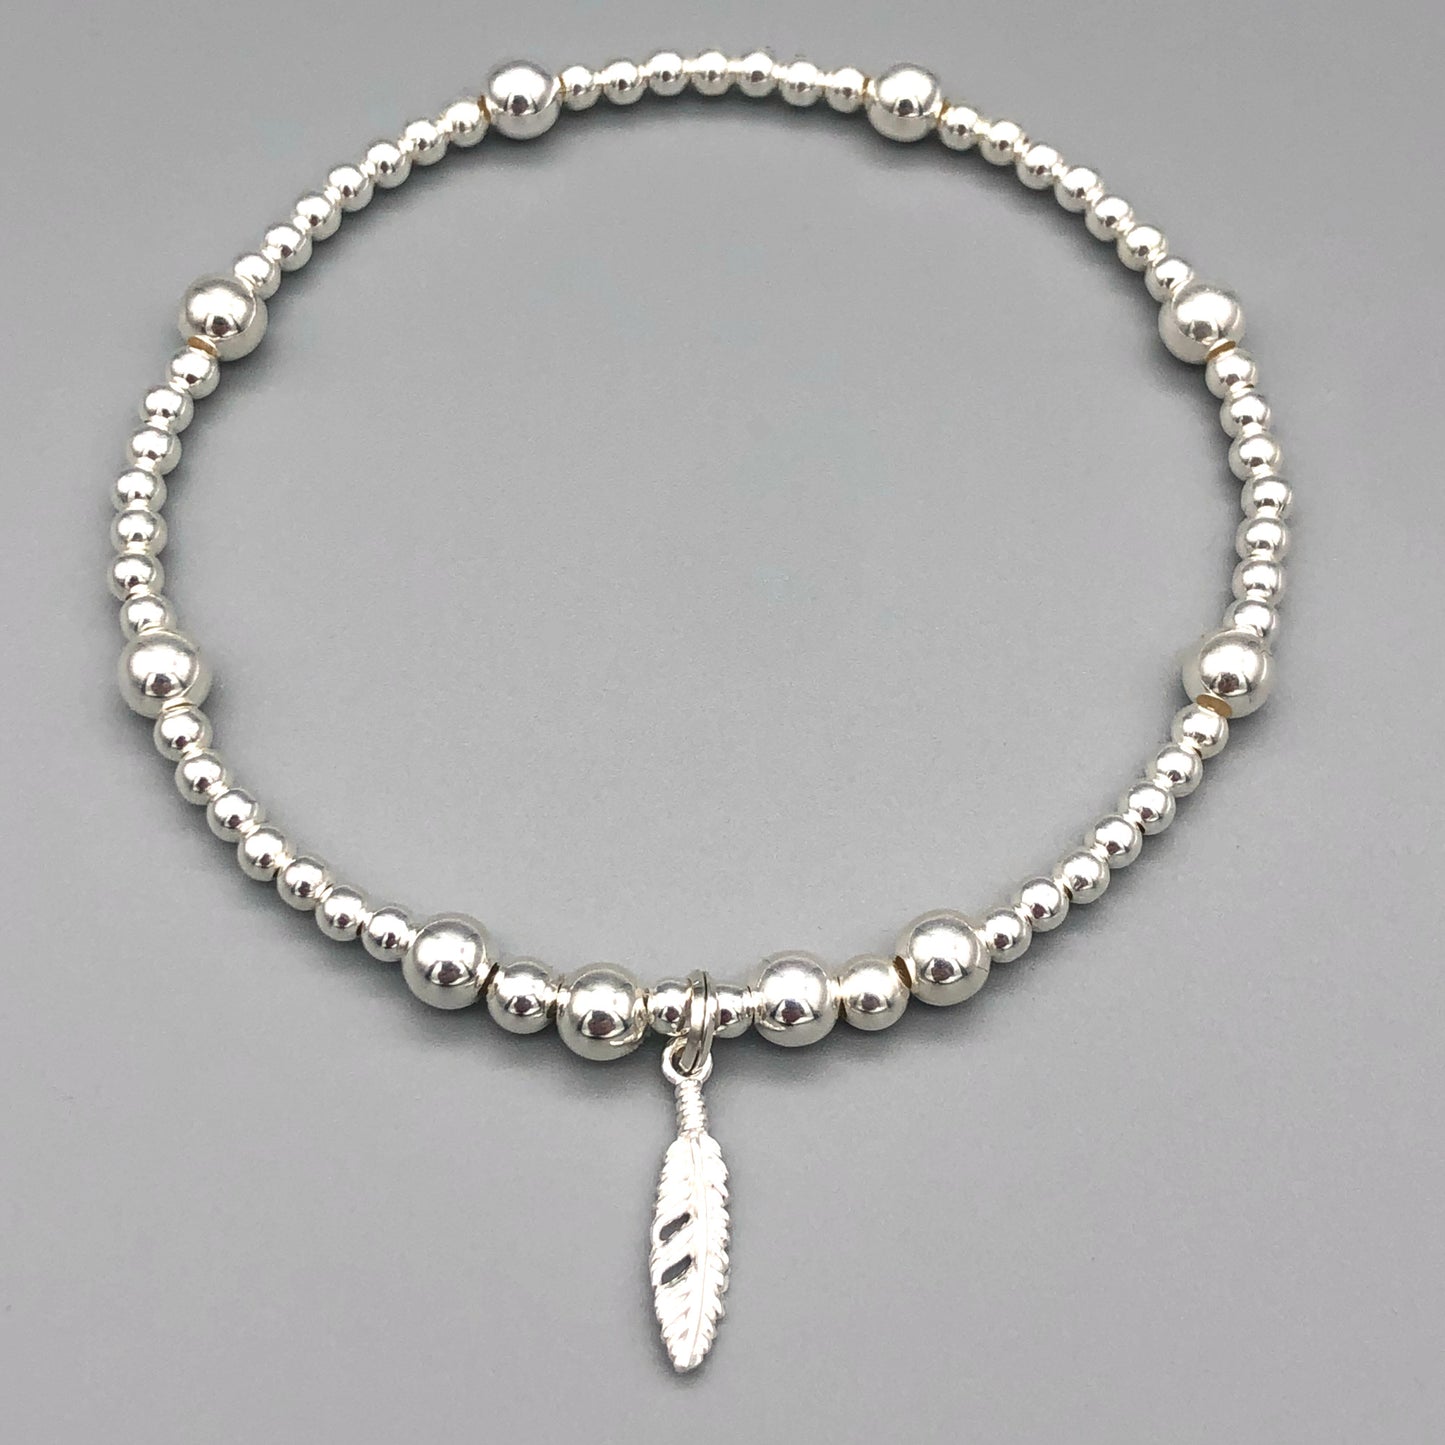 Feather charm women's 925 sterling silver stacking bracelet by My Silver Wish